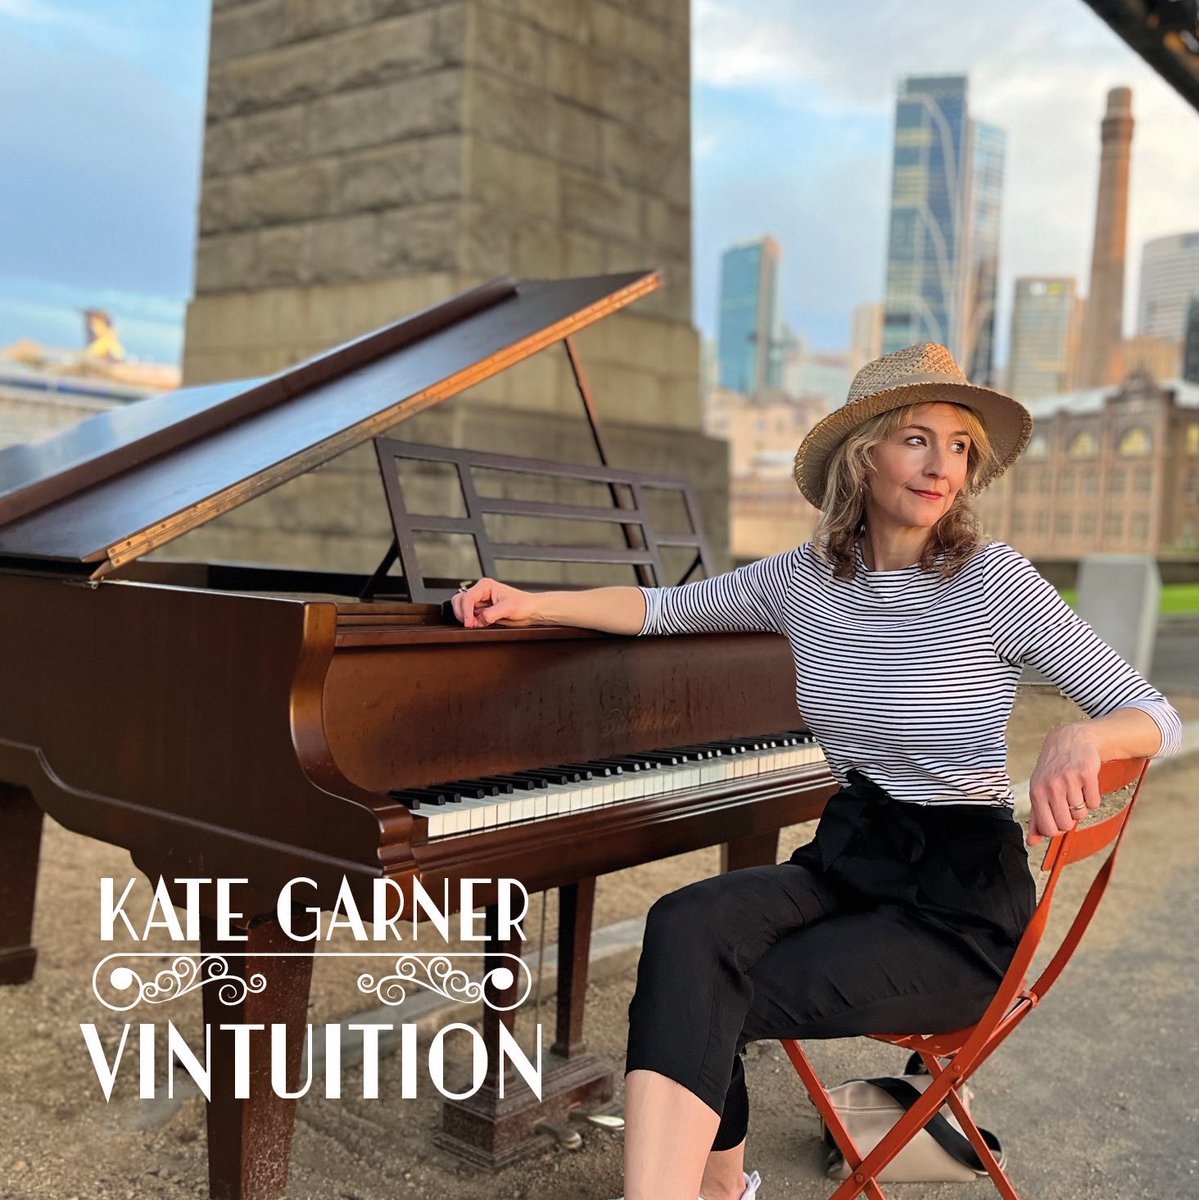 Today is #NationalAlbumDay My new album ‘Vintuition’ will be on general release in January but you can purchase a limited release copy at my ‘London Girl’ shows in Cromer and London! Tickets in pinned tweet.